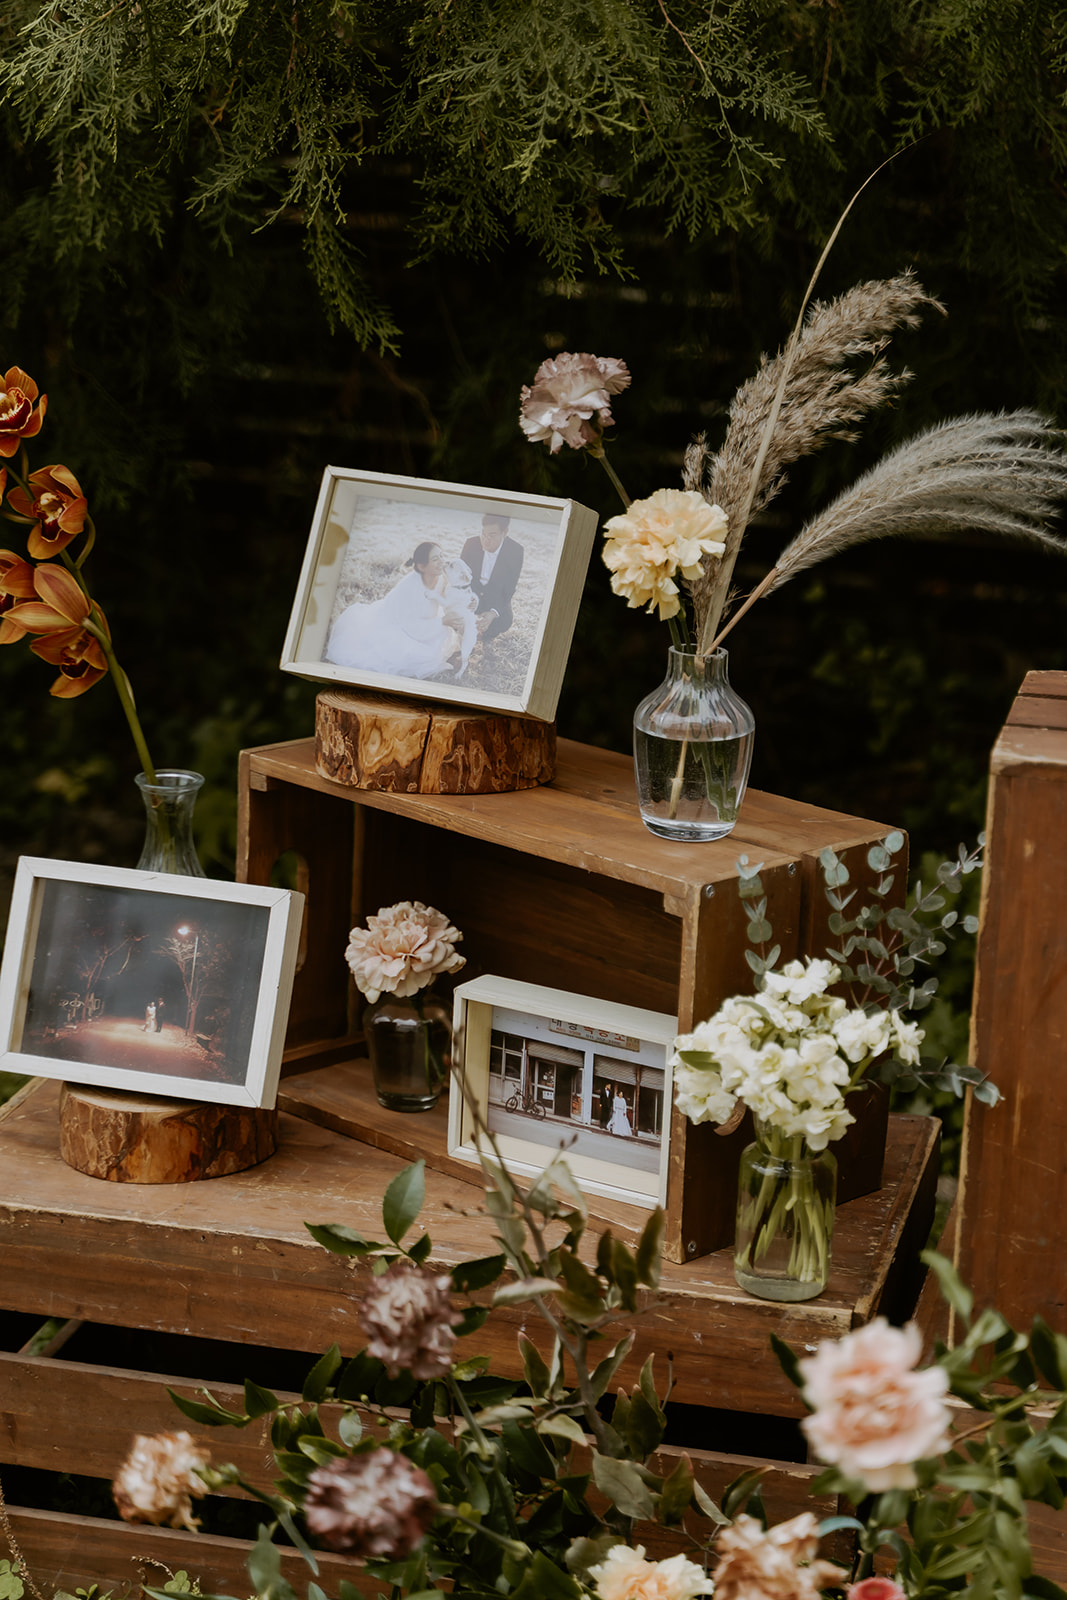 A framed wedding photo placed atop a rustic wooden pedestal surrounded by an assortment of flowers and plants.